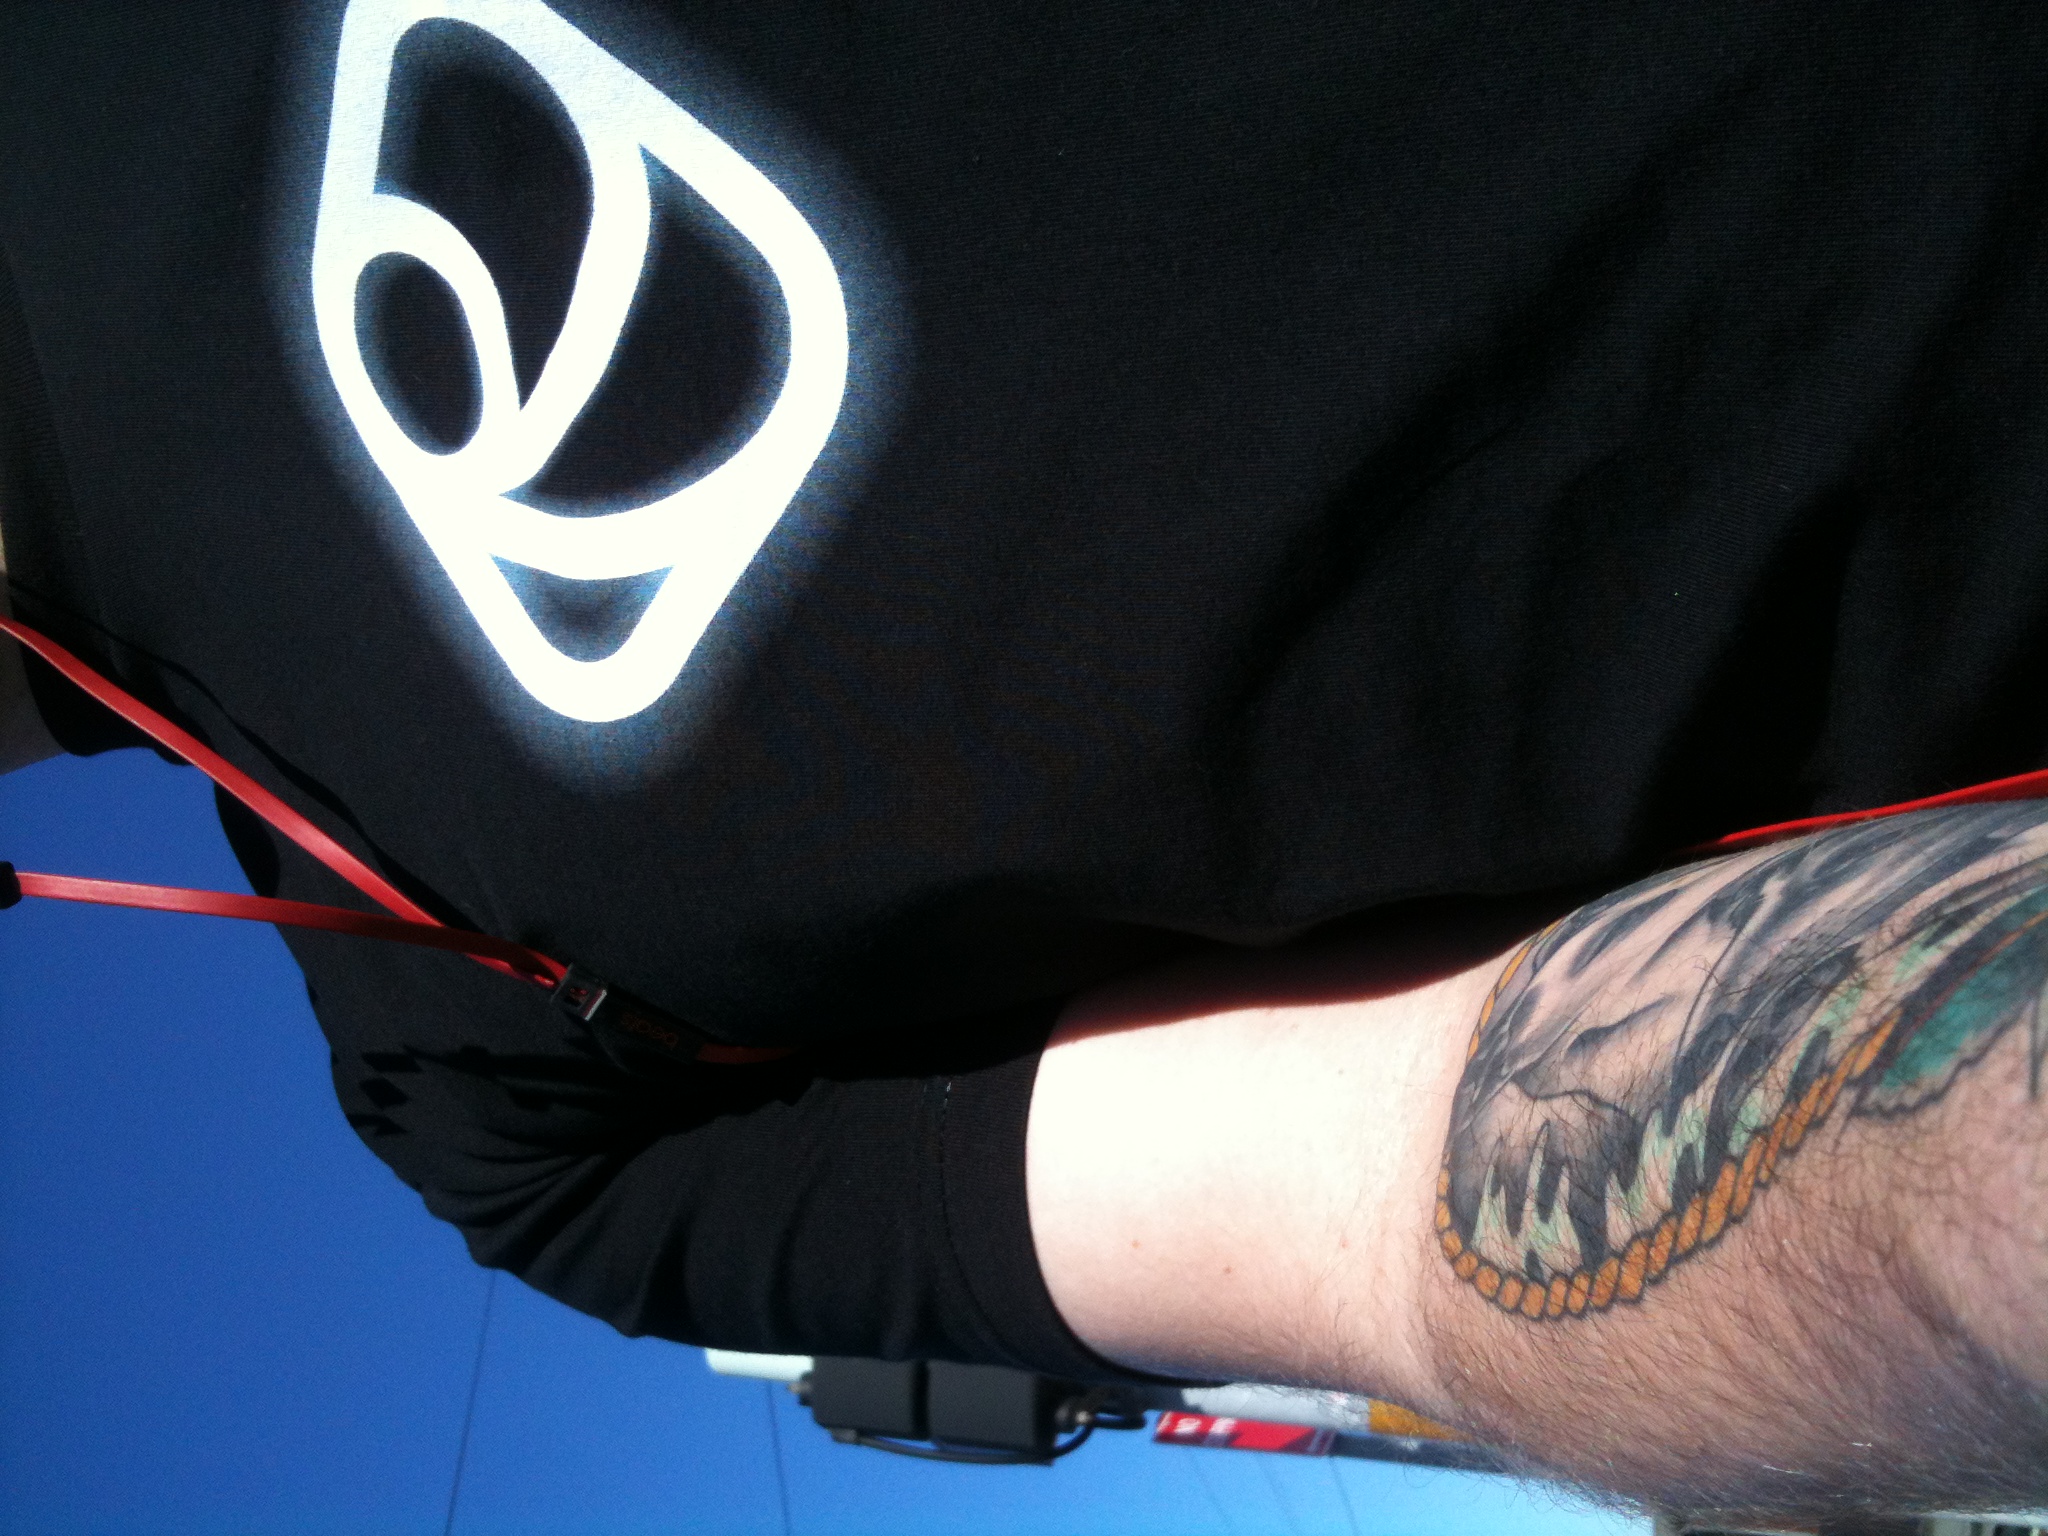 a tattooed arm with a clock on it and the logo of the swiss army on the arm